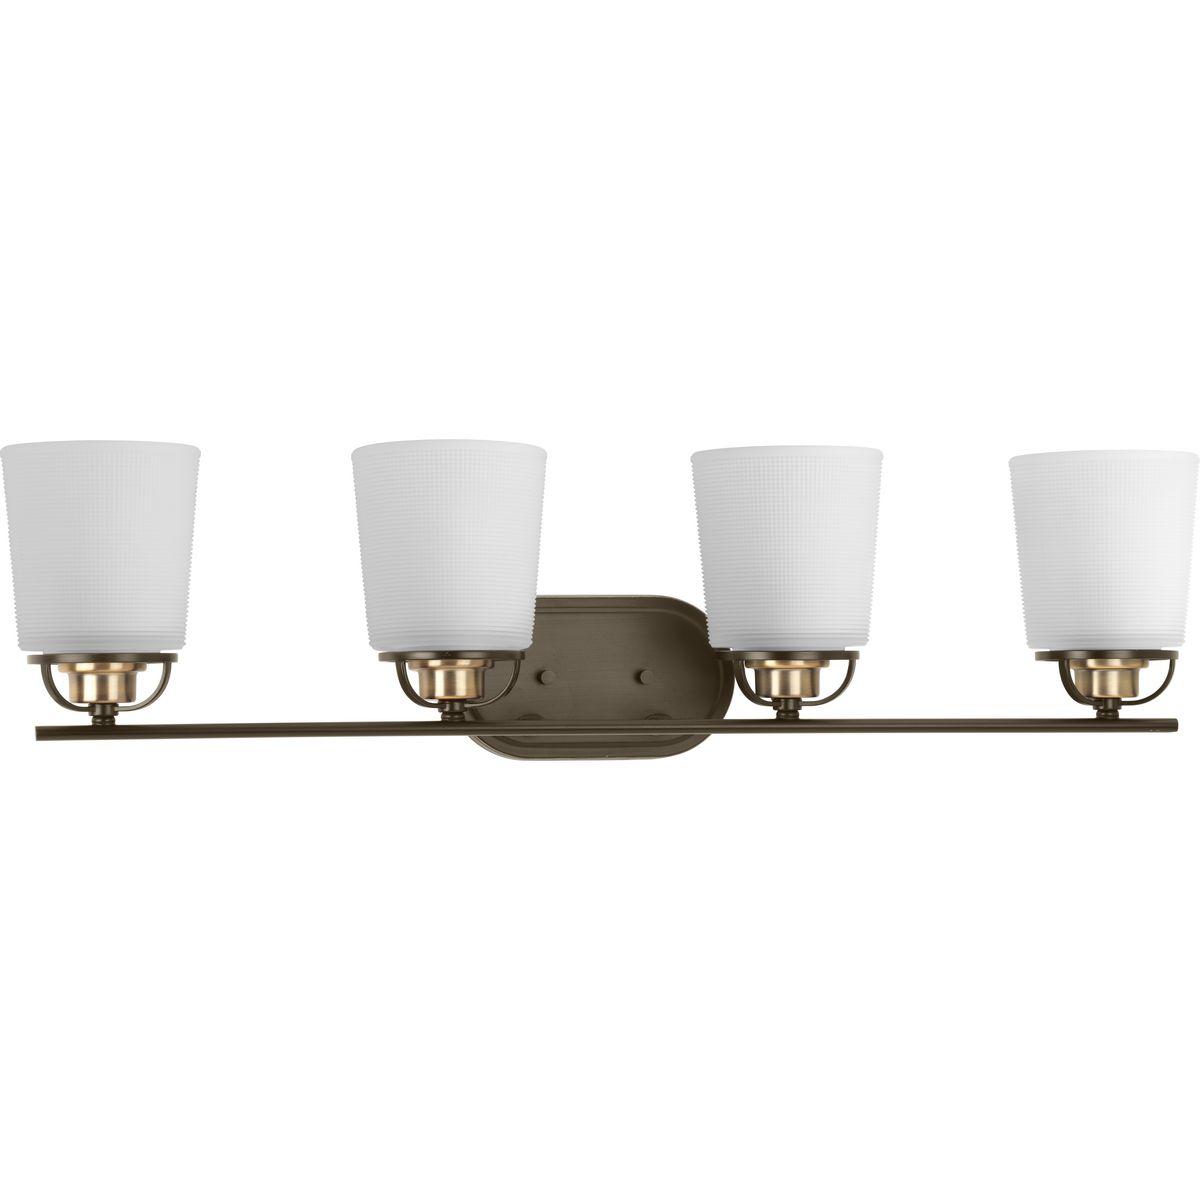 Hubbell P300007-020 A modern form with industrial-inspired accents are featured in West Village. Double prismatic glass shades provide a beautiful illumination effect. Visual interest continues with a three-spoke design that holds each glass shade. Antique Bronze with Antiqu